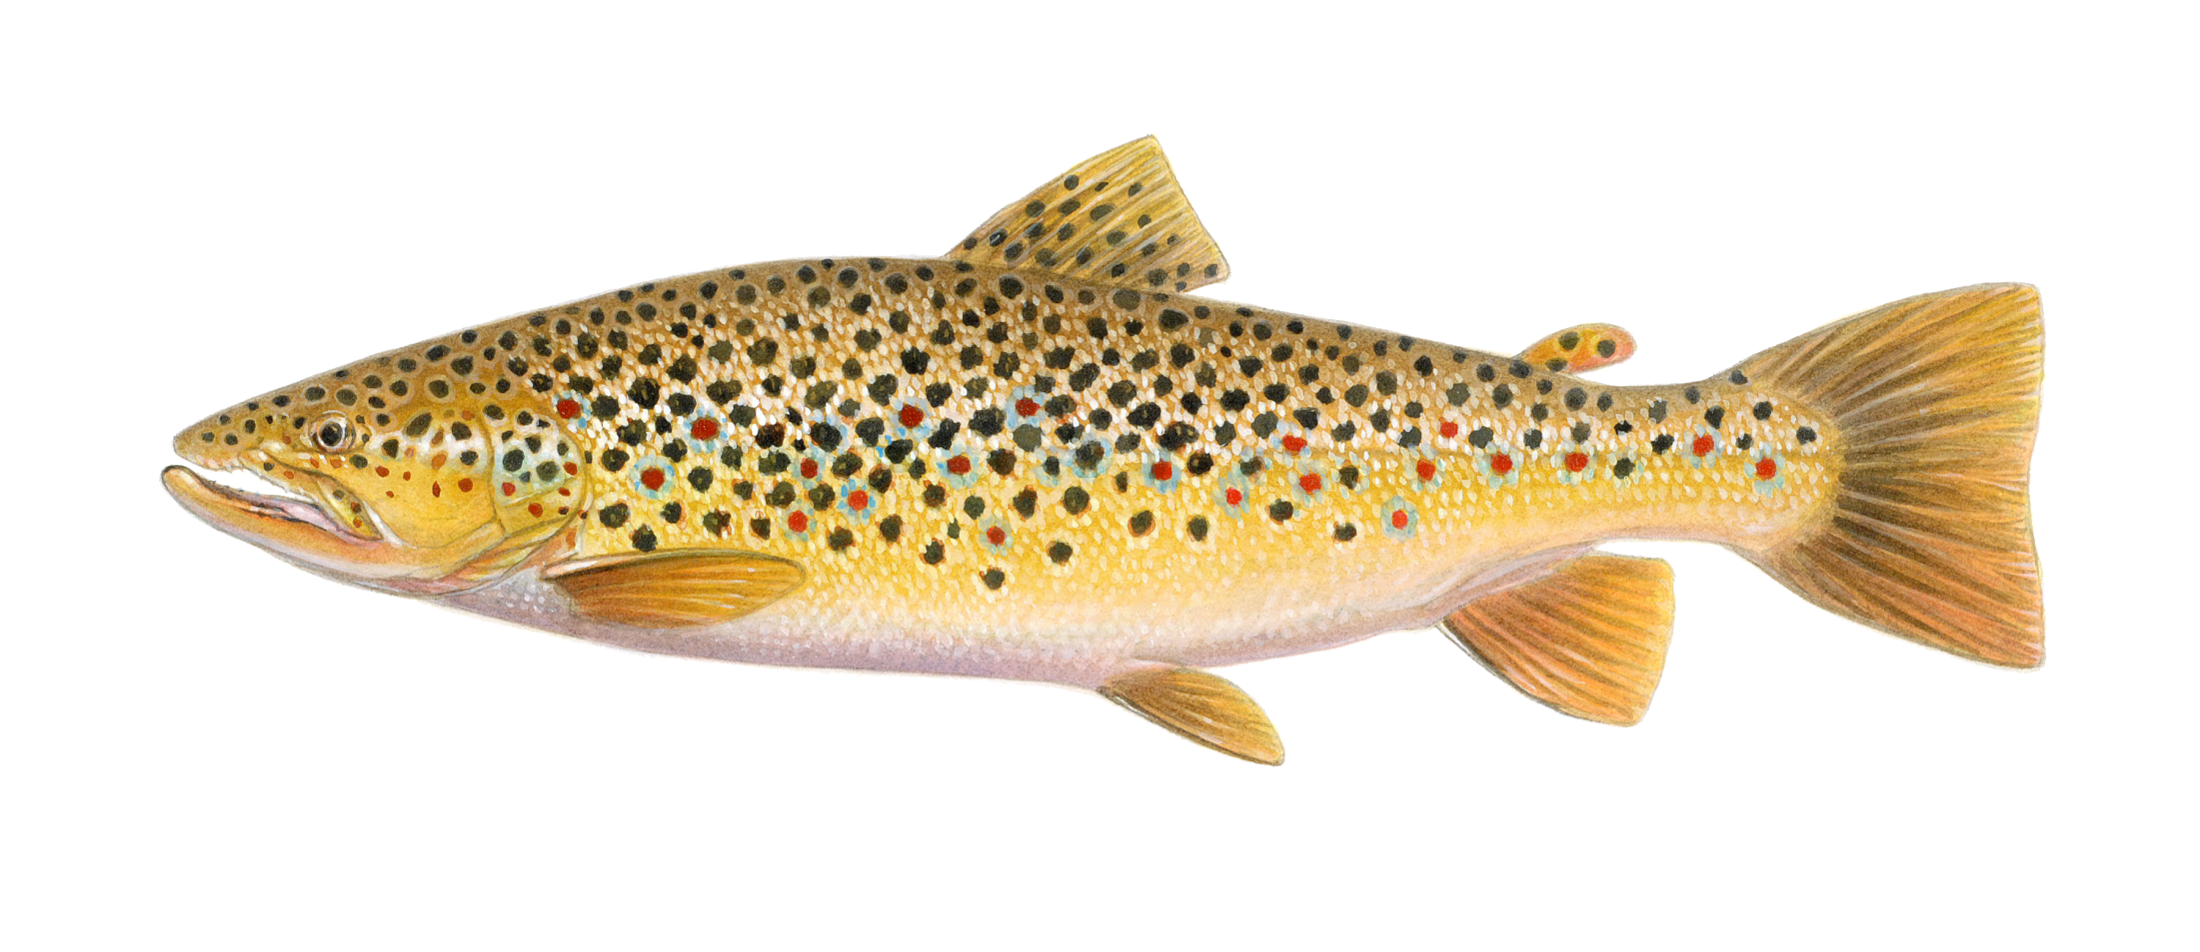 A photograph of a Brook Trout